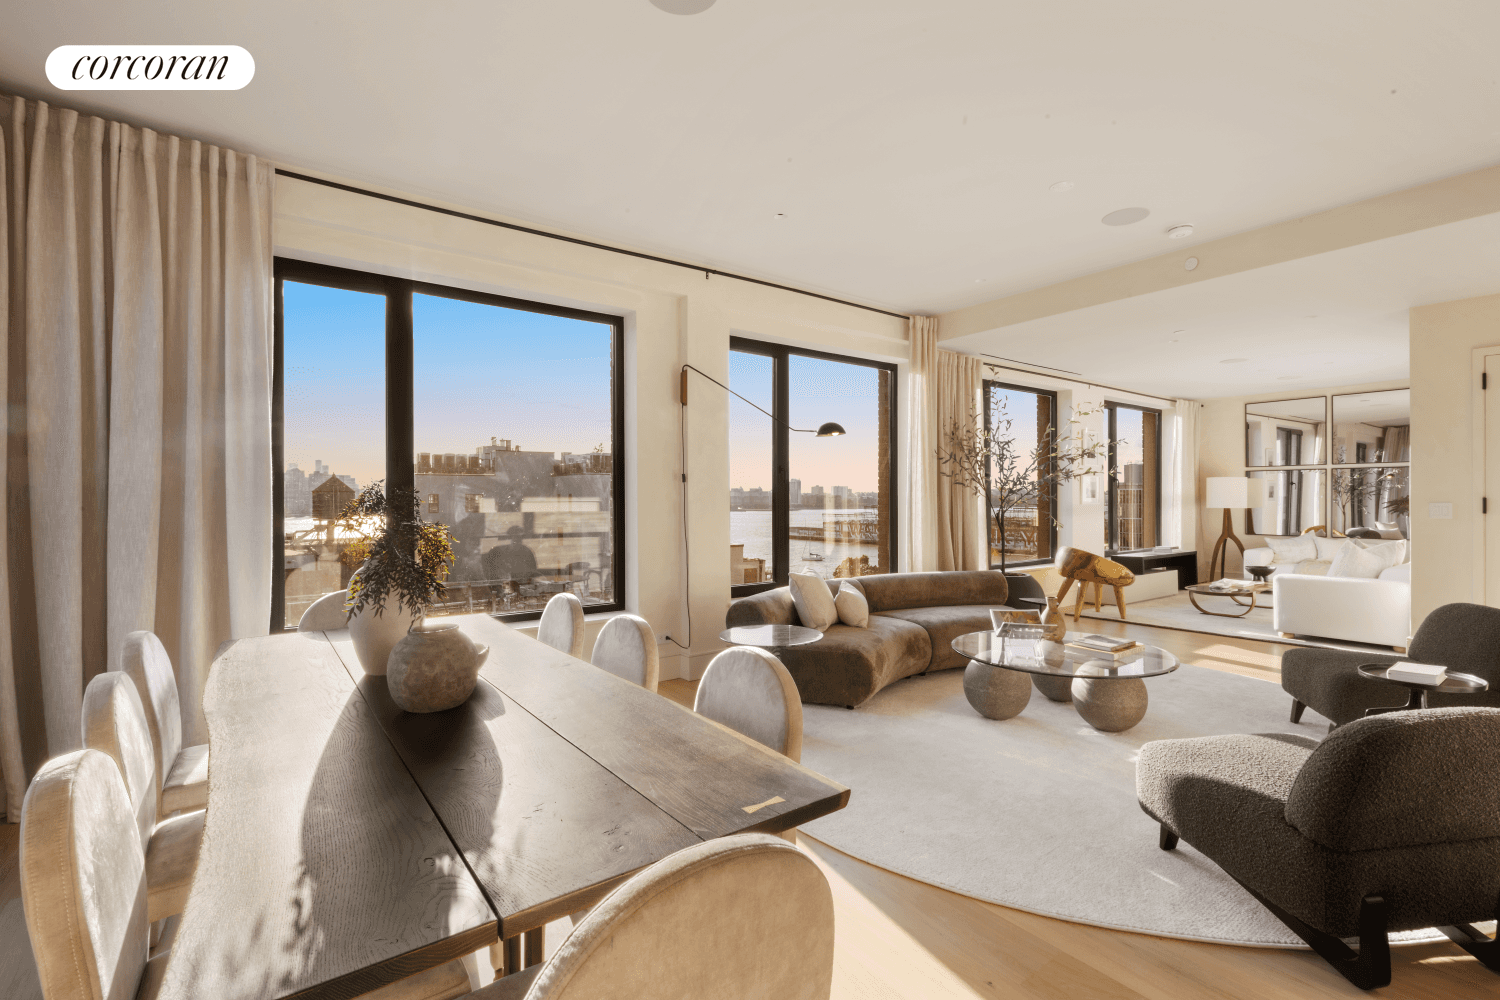 Welcome to 465 Washington Street, the pinnacle of luxury living, where the esteemed LFD Studio, guided by the visionary Laura Fardanesh, has redefined sophistication and elegance in this penthouse masterpiece.